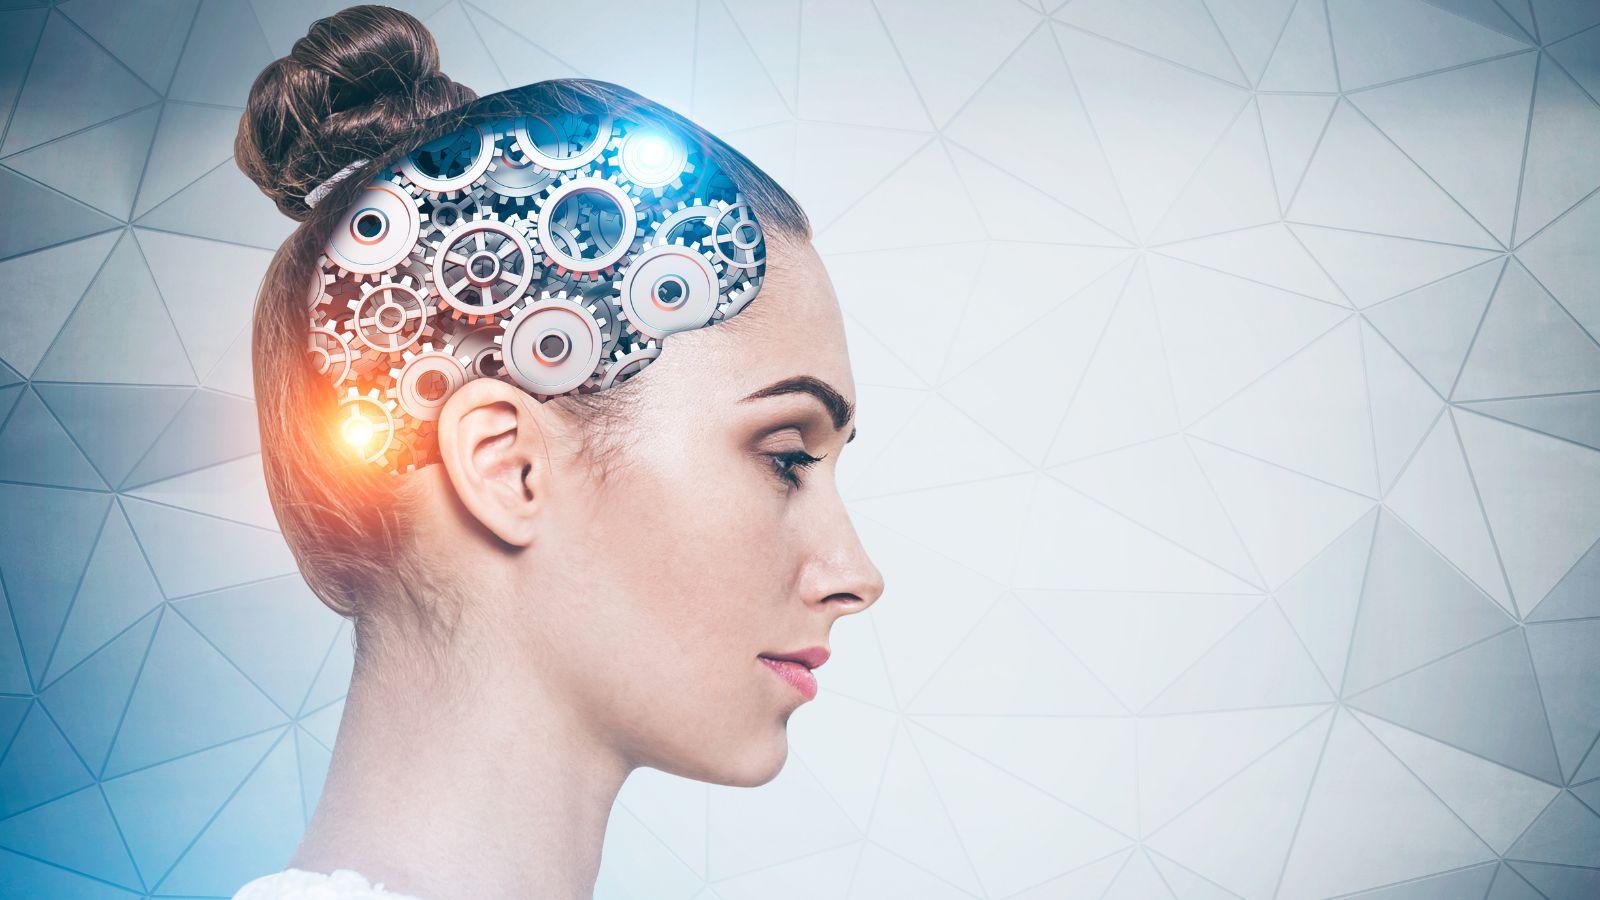 what helps menopausal brain fog. Image of woman with hair in a bun with a bright light shining out of the back of her head and cogs in the front of her head, surrounded by clouds